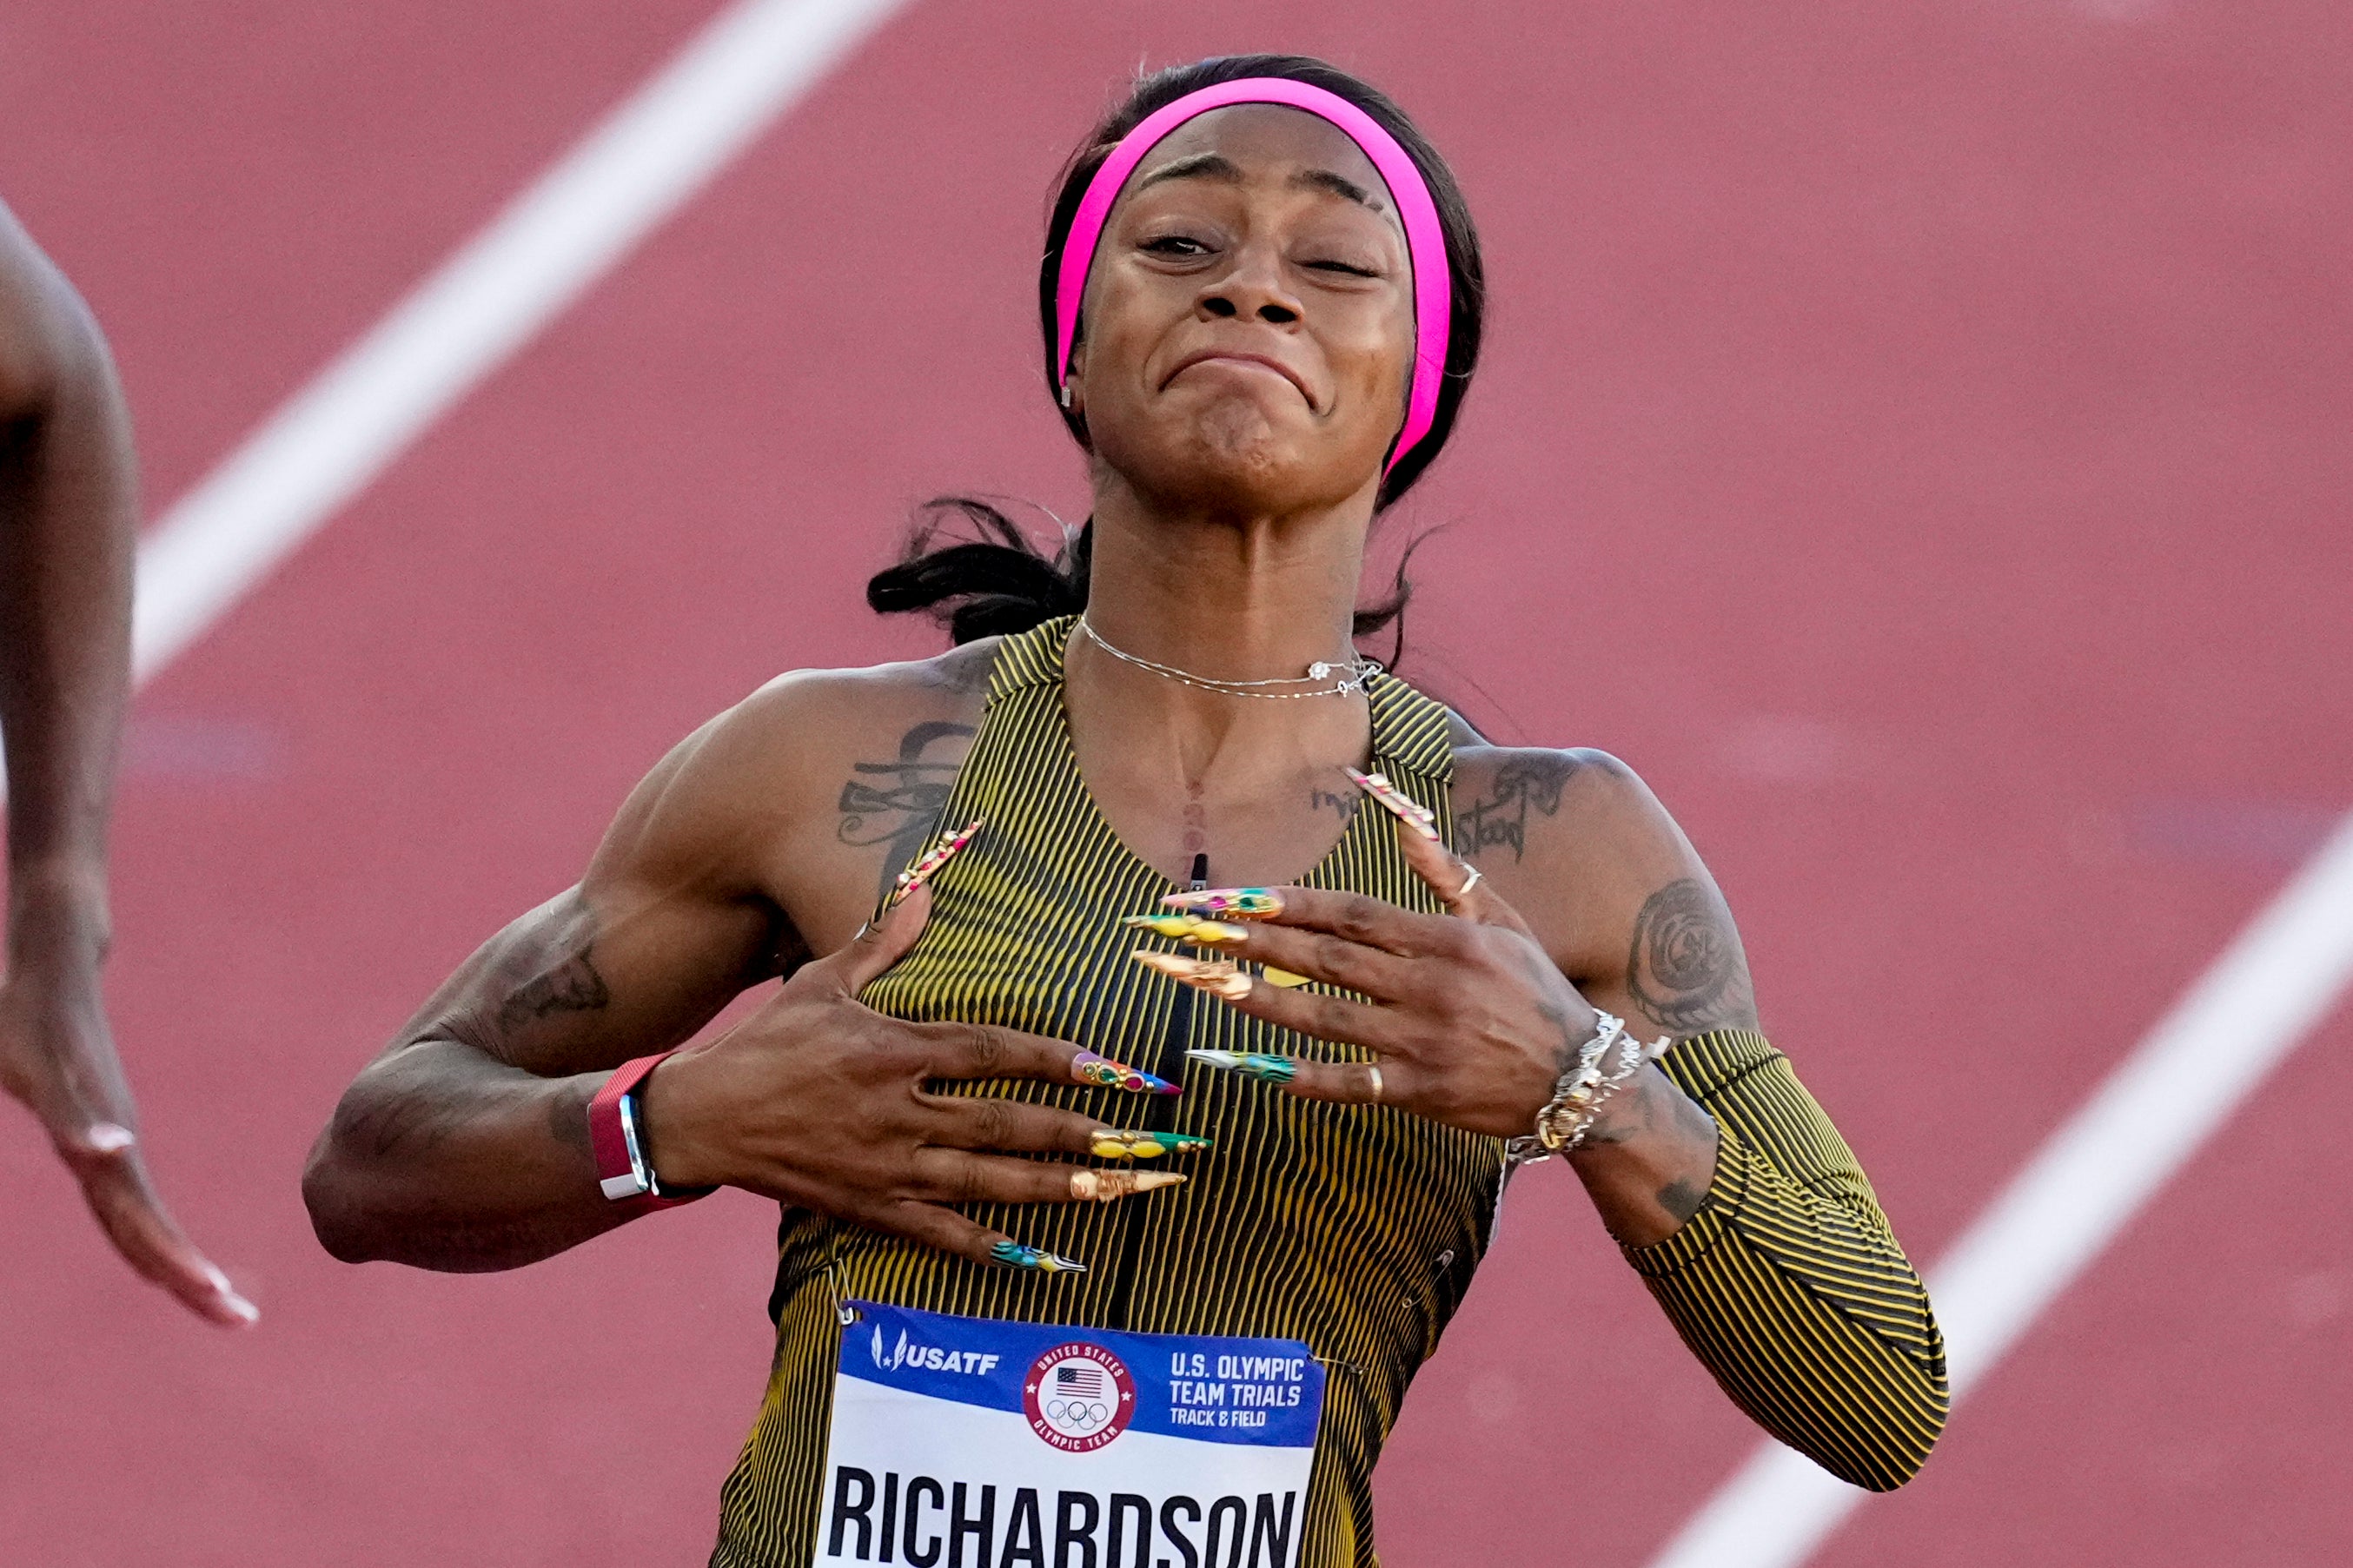 Sha’Carri Richardson was denied an Olympic debut in 2021 but is poised to star in Paris